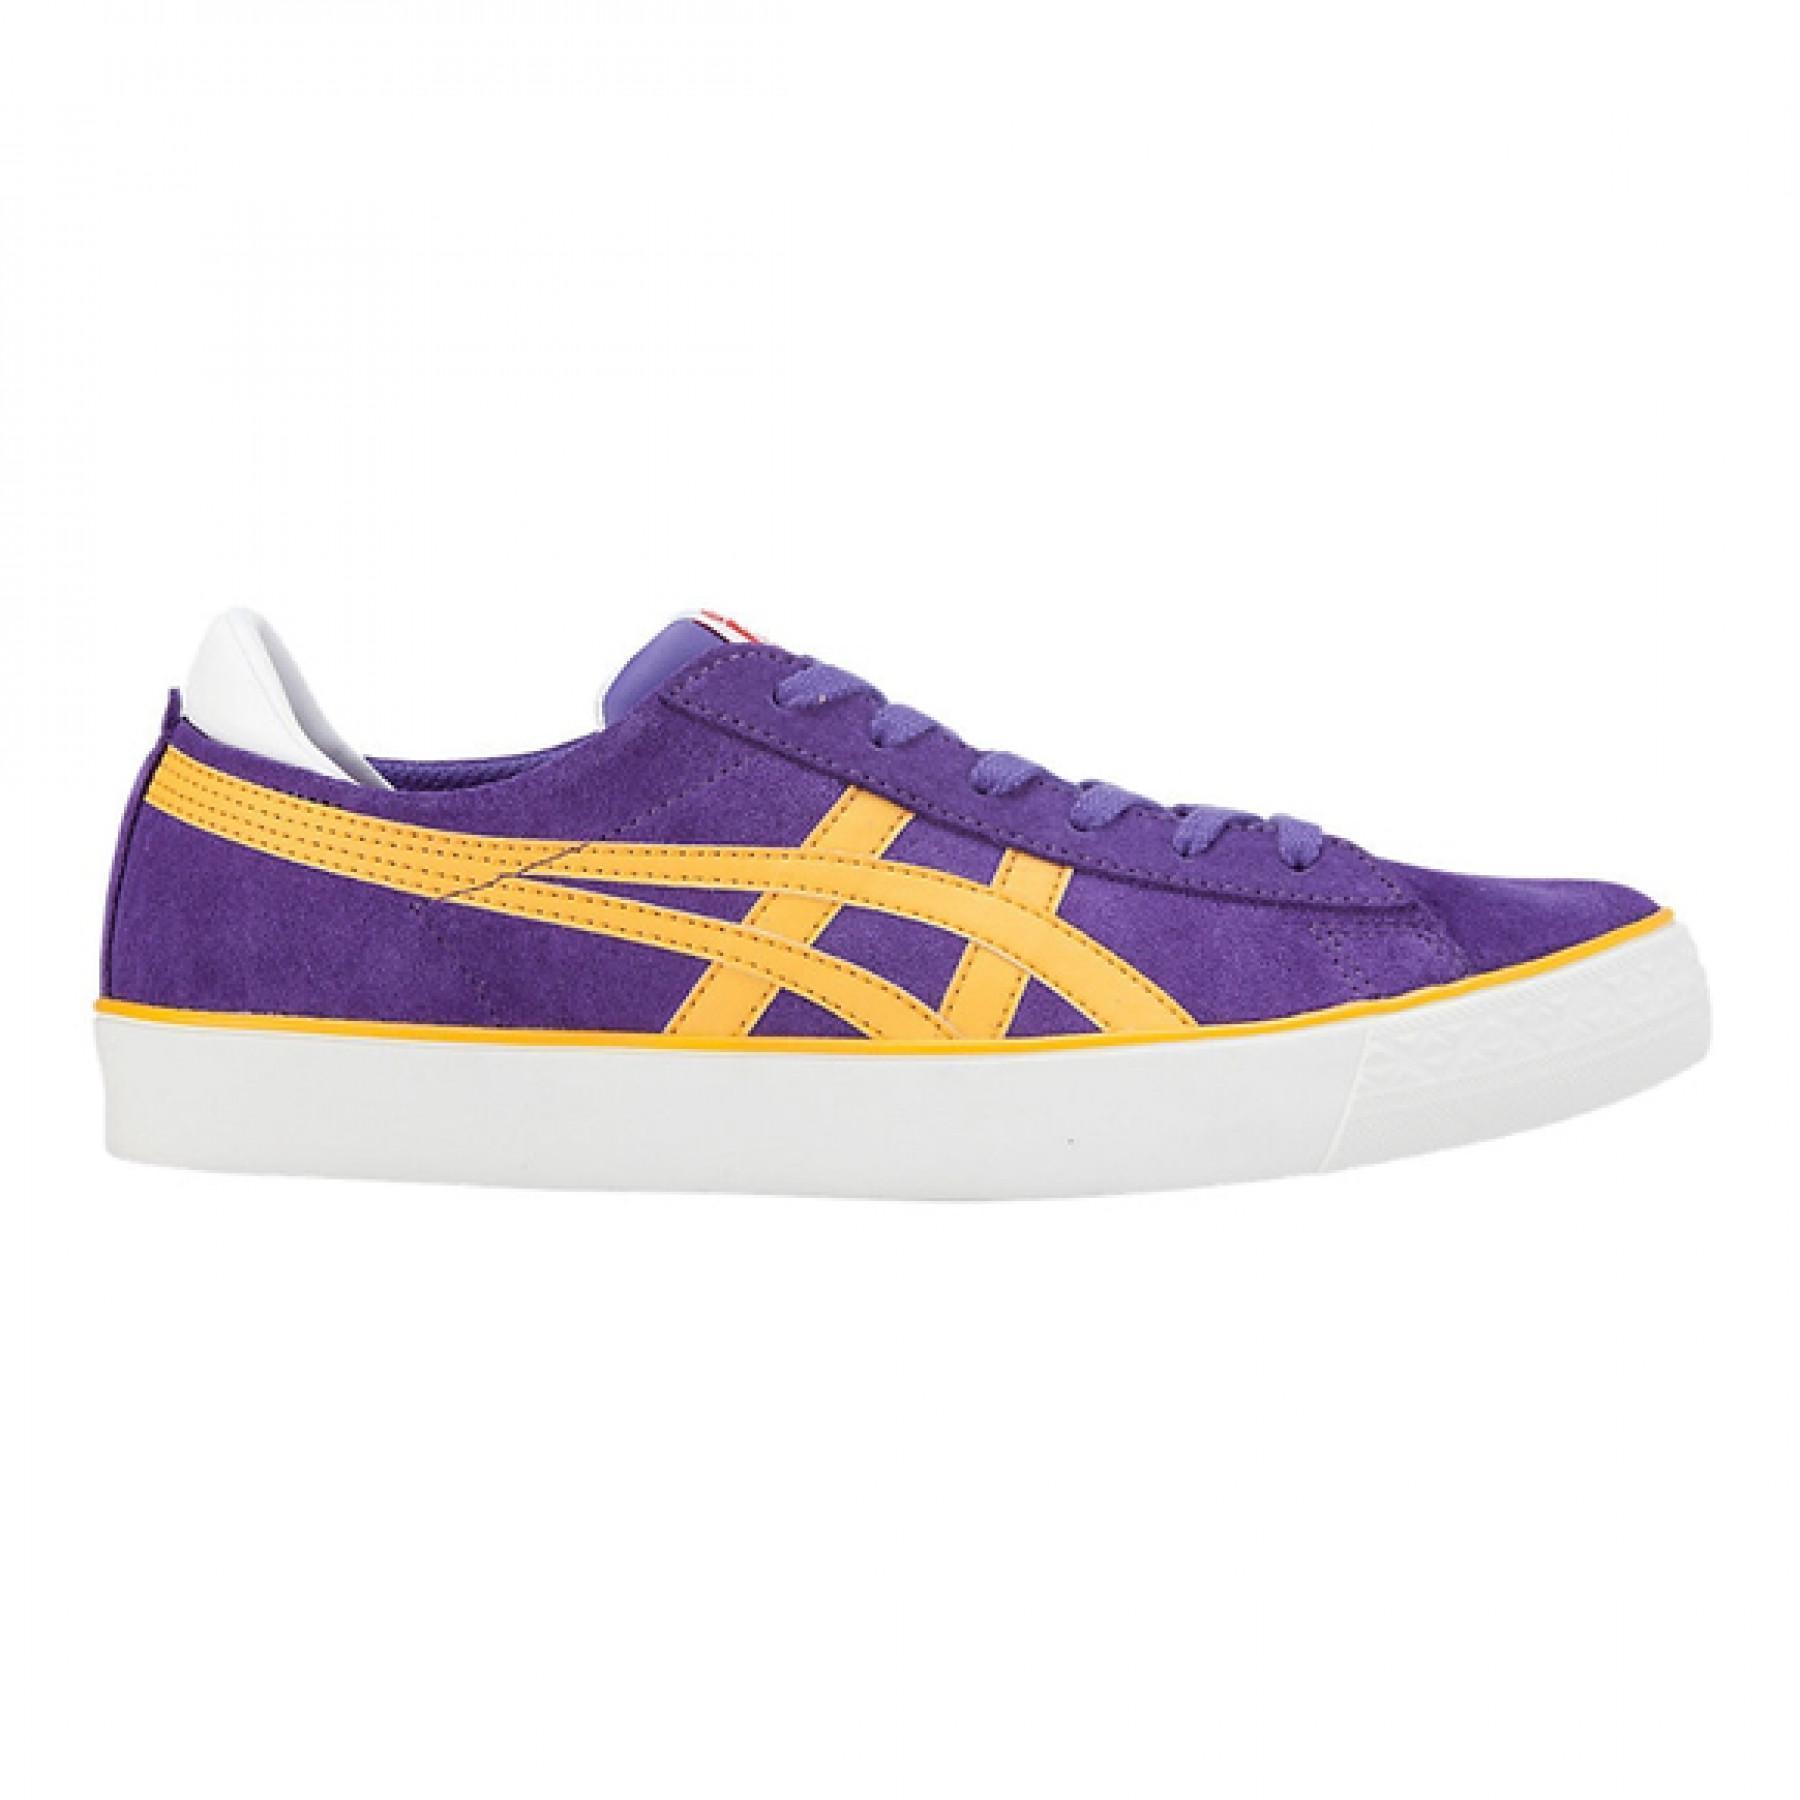 Sneakers Onitsuka Tiger Fabre BL-S 2.0